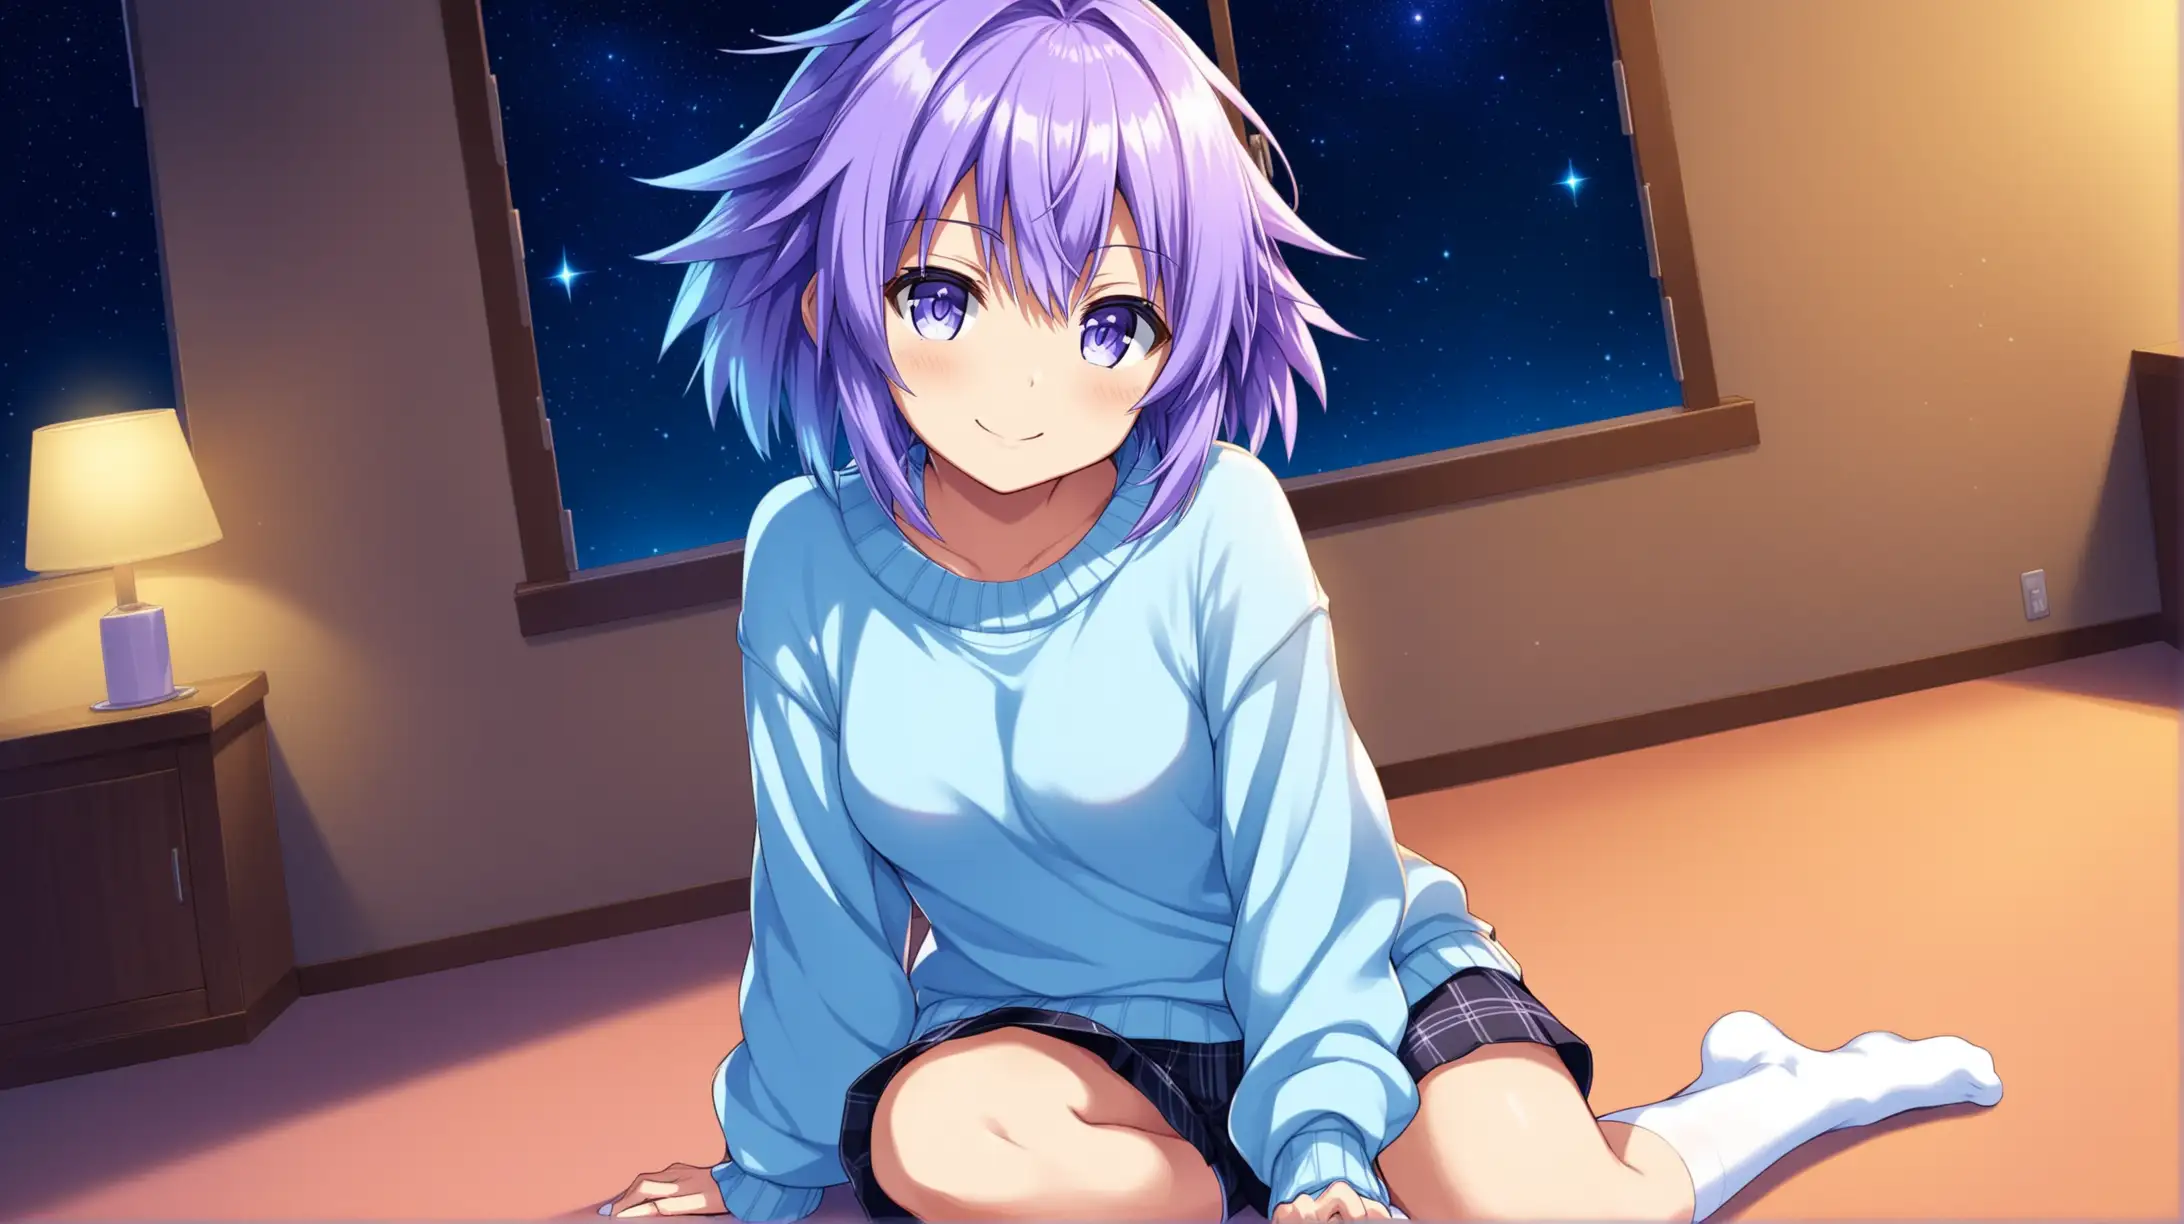 Draw the character Neptune from the Hyperdimension Neptunia series with short hair sitting indoors alone at night while she is wearing pants with white socks and a sweater and smiling at the viewer